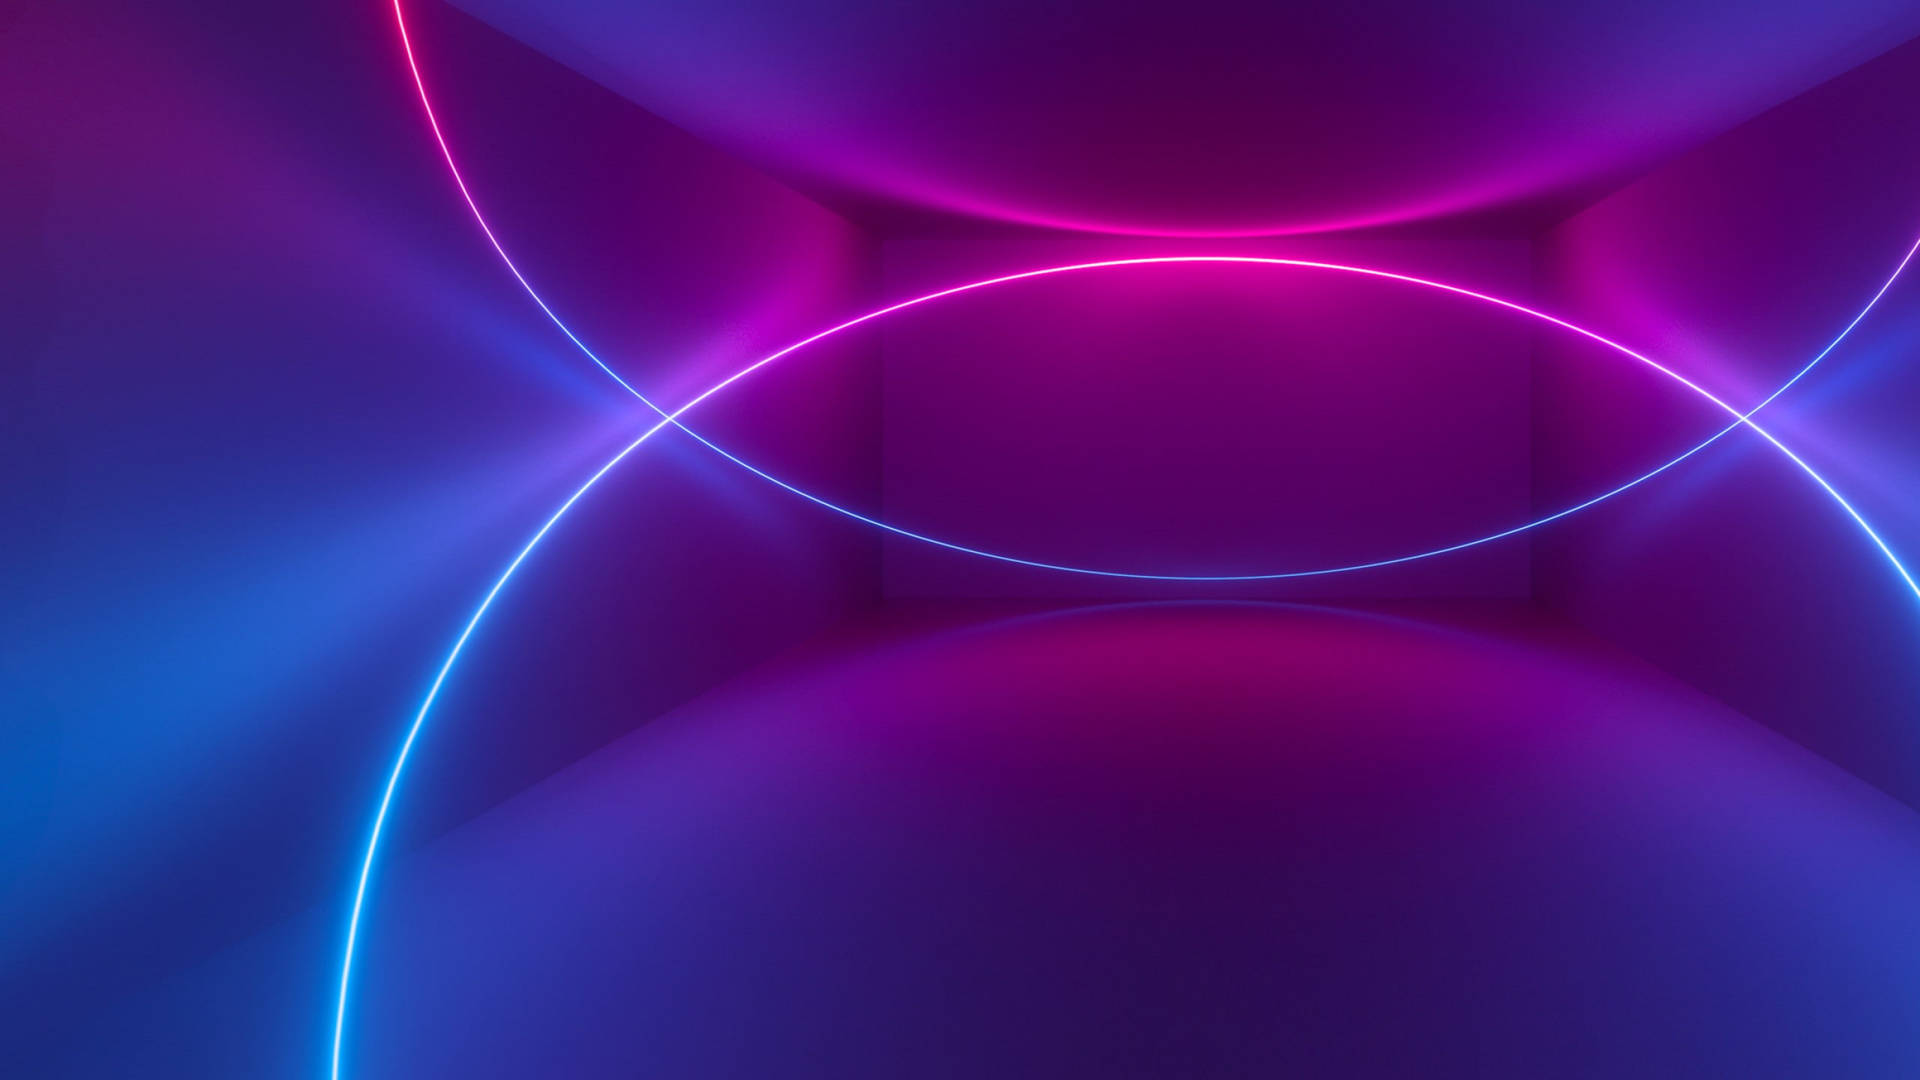 Huawei Mate 20 Neon Tunnel Background